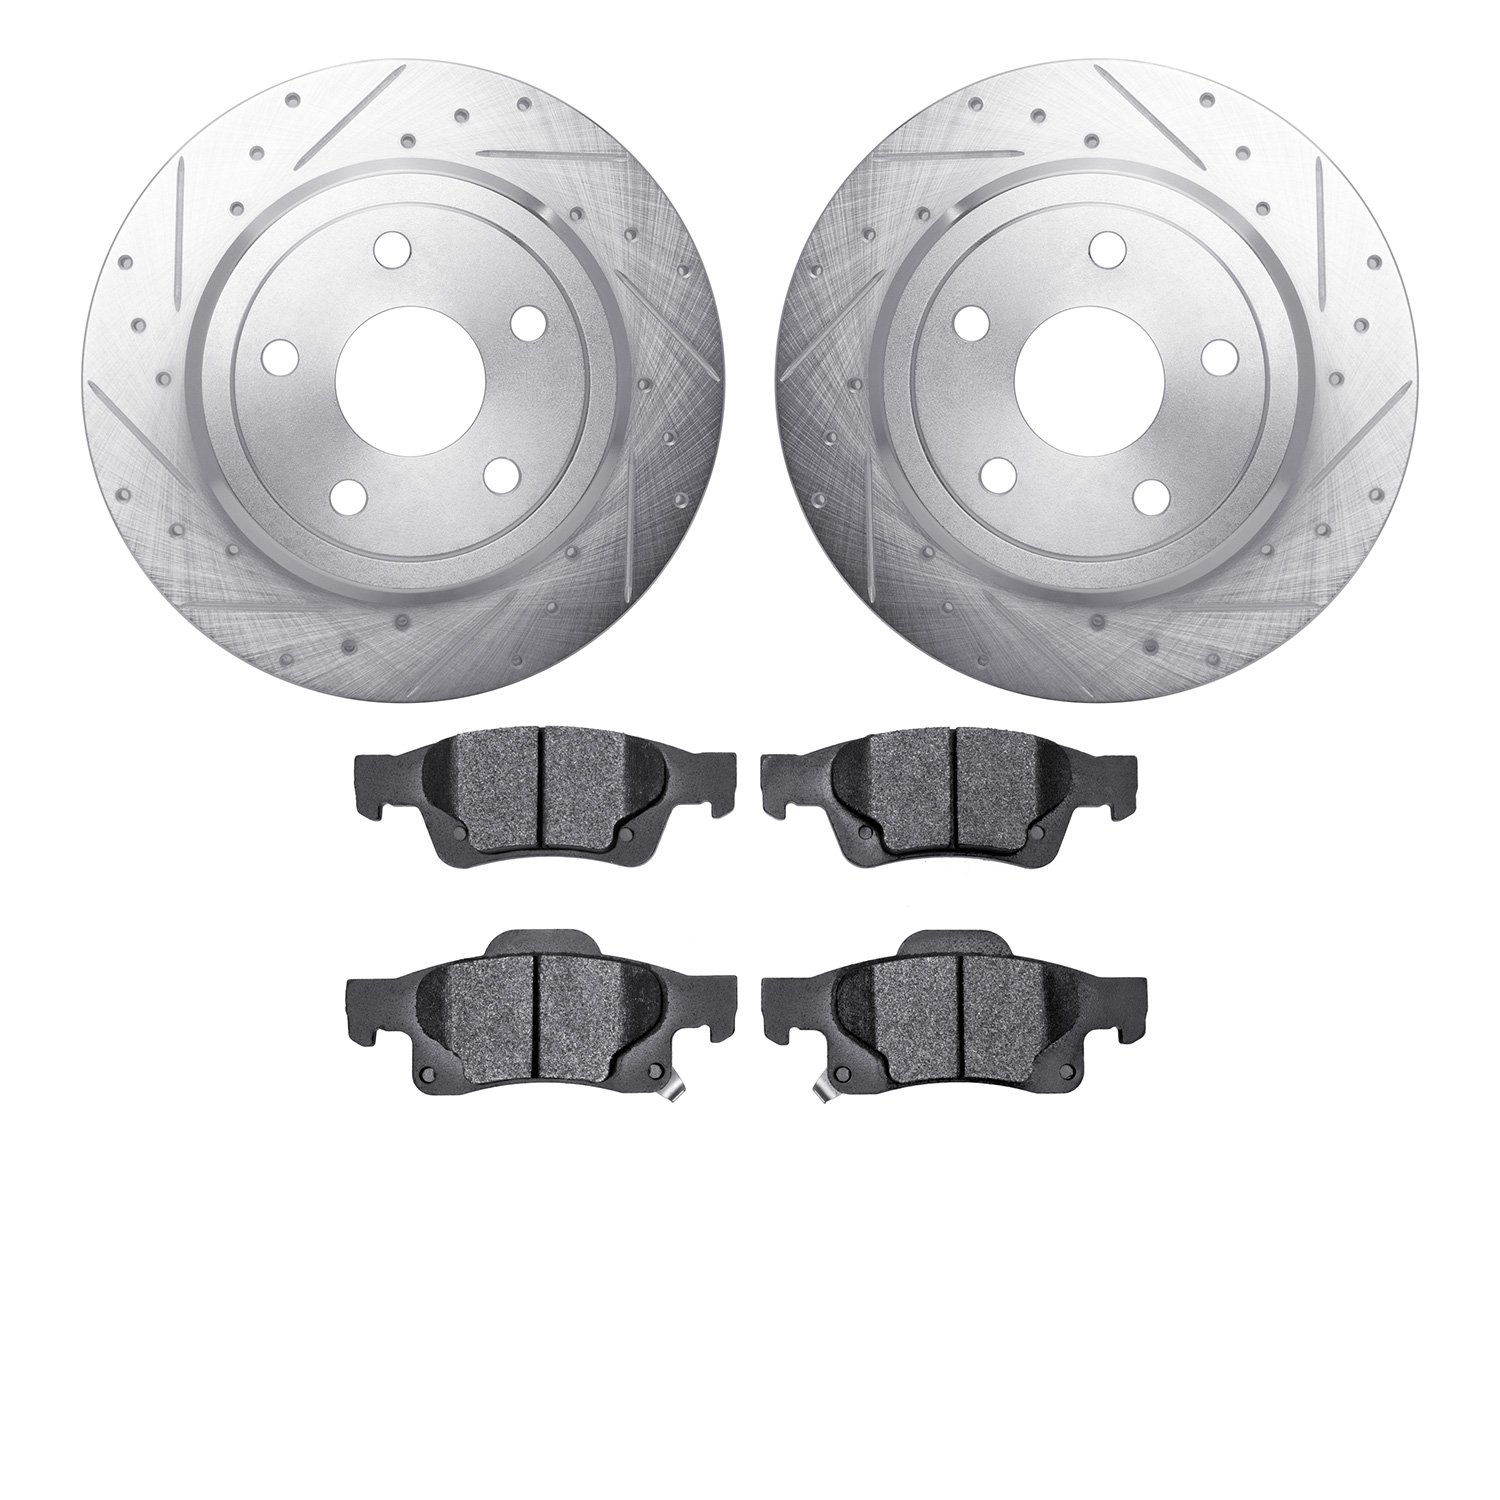 7202-42001 Drilled/Slotted Rotors w/Heavy-Duty Brake Pads Kit [Silver], Fits Select Mopar, Position: Rear